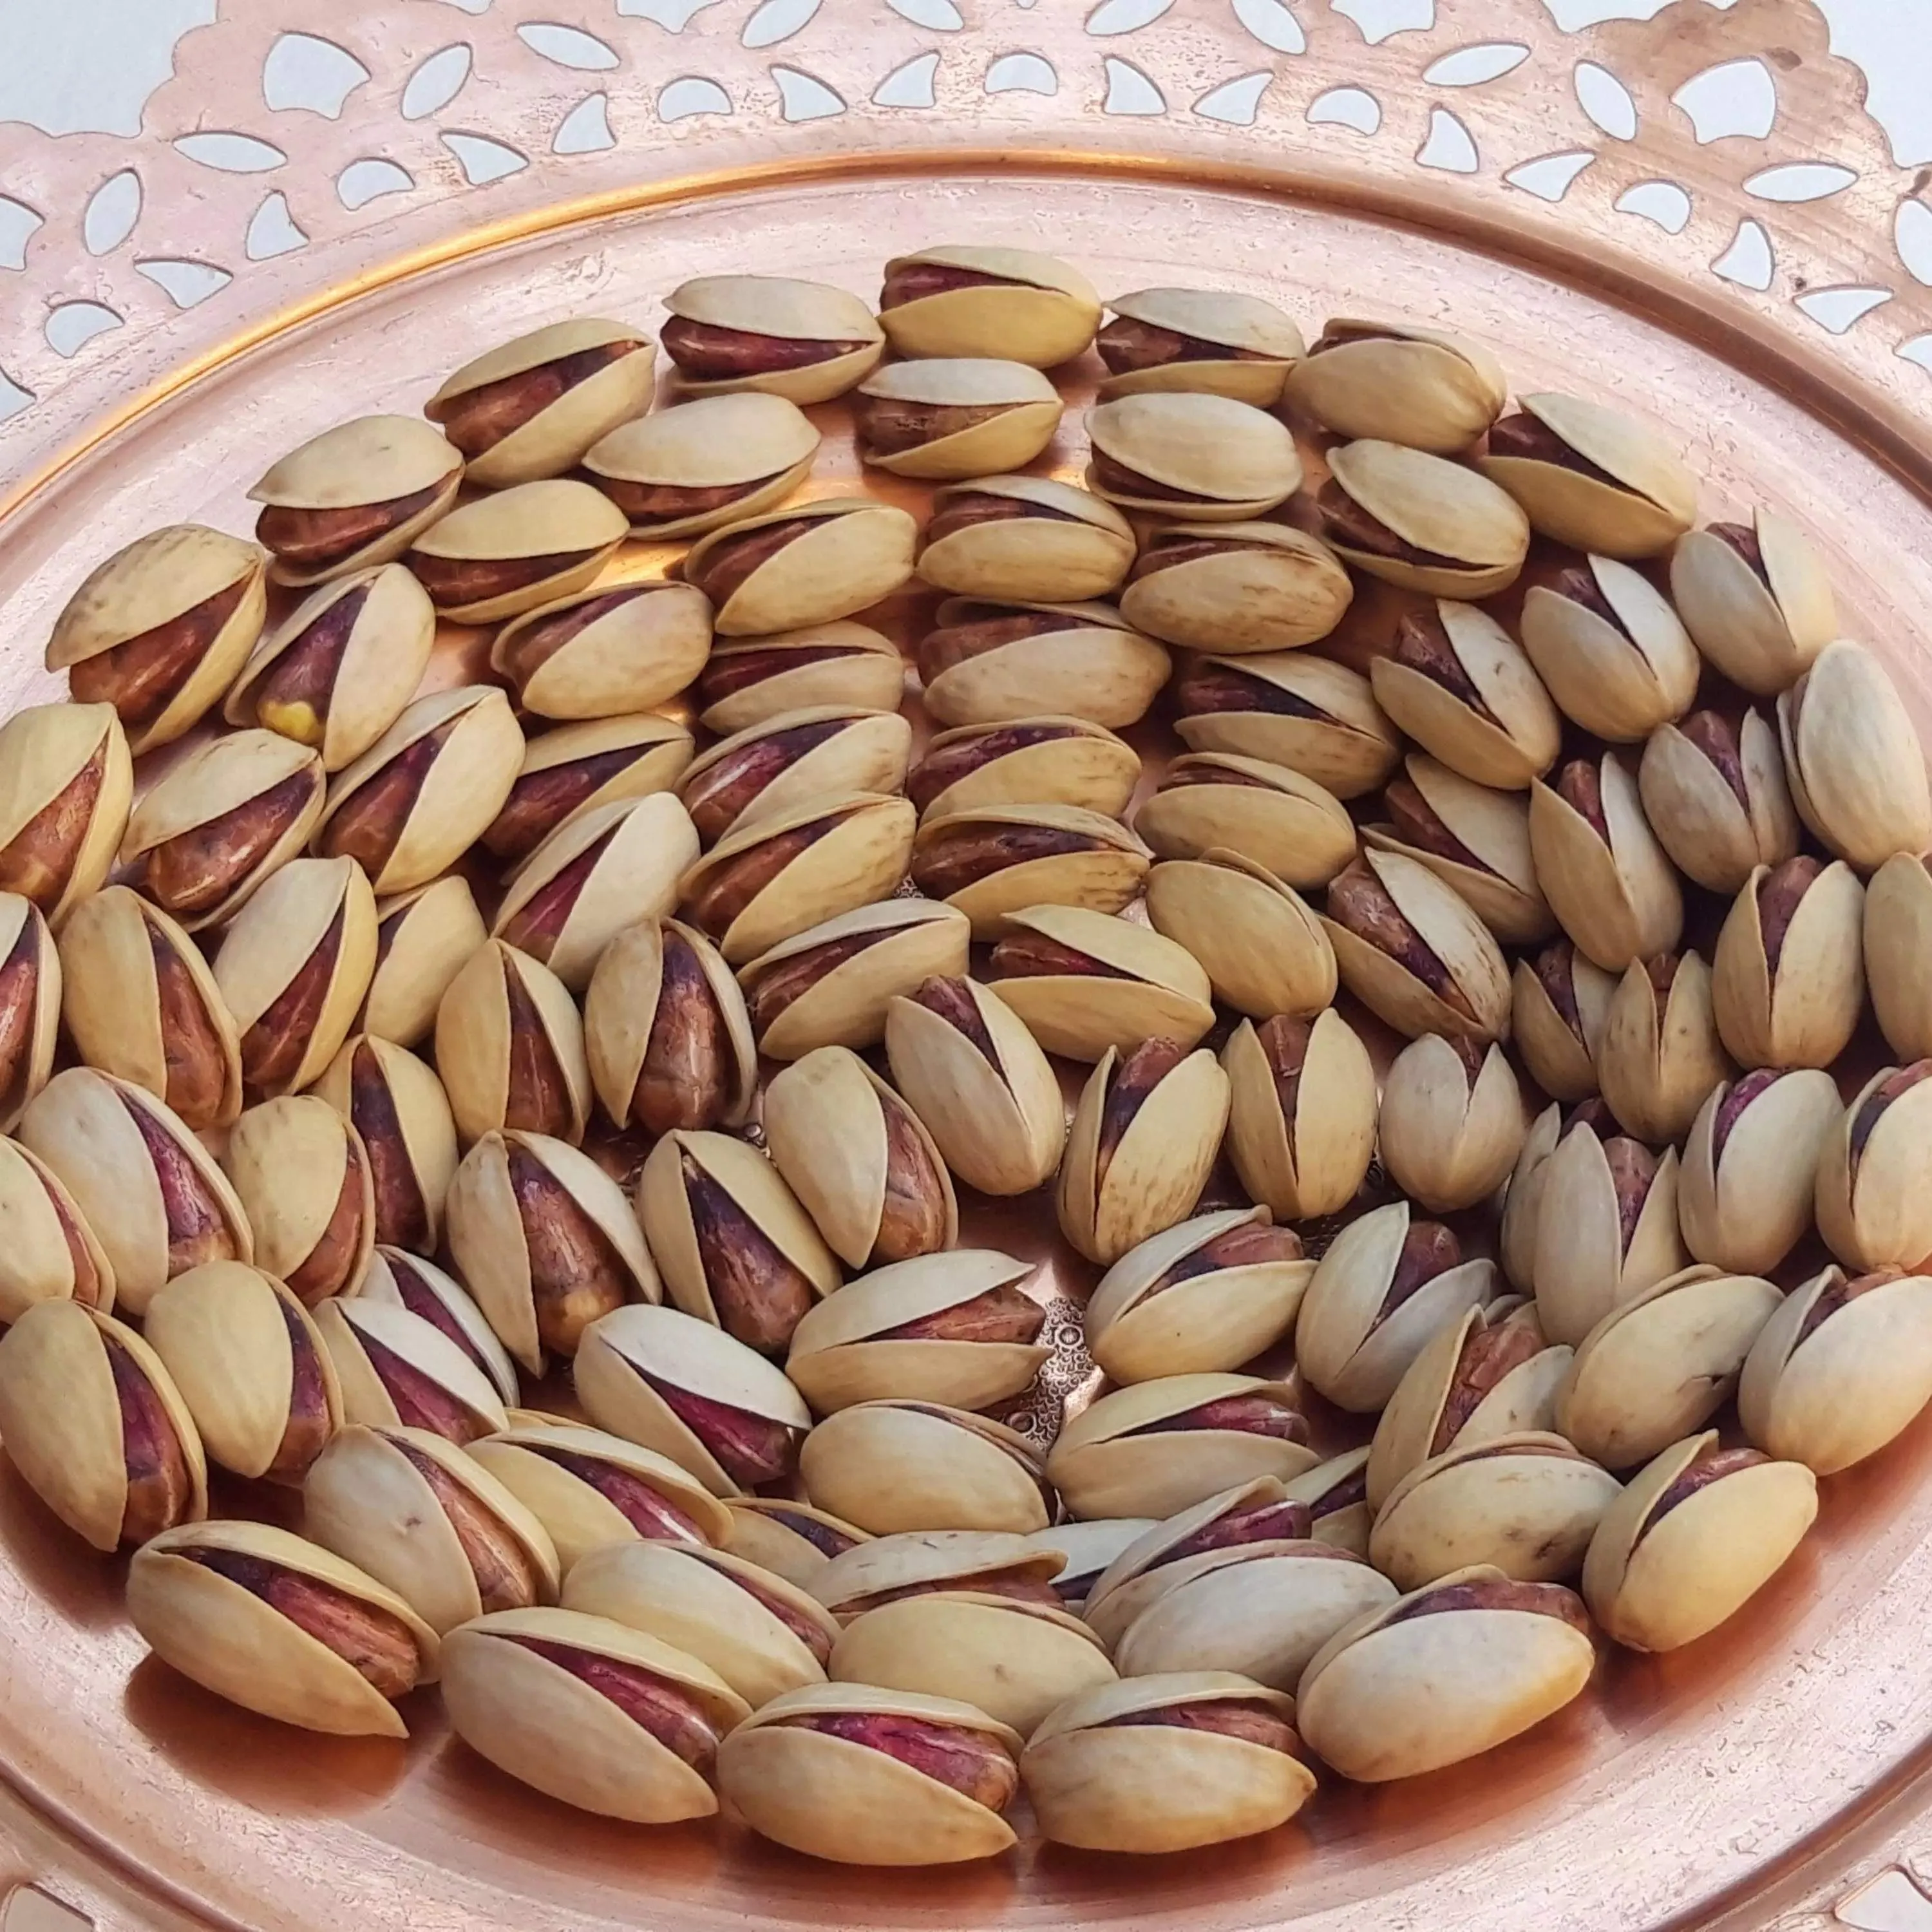 Purchase and price of Shah of Iran pistachios types